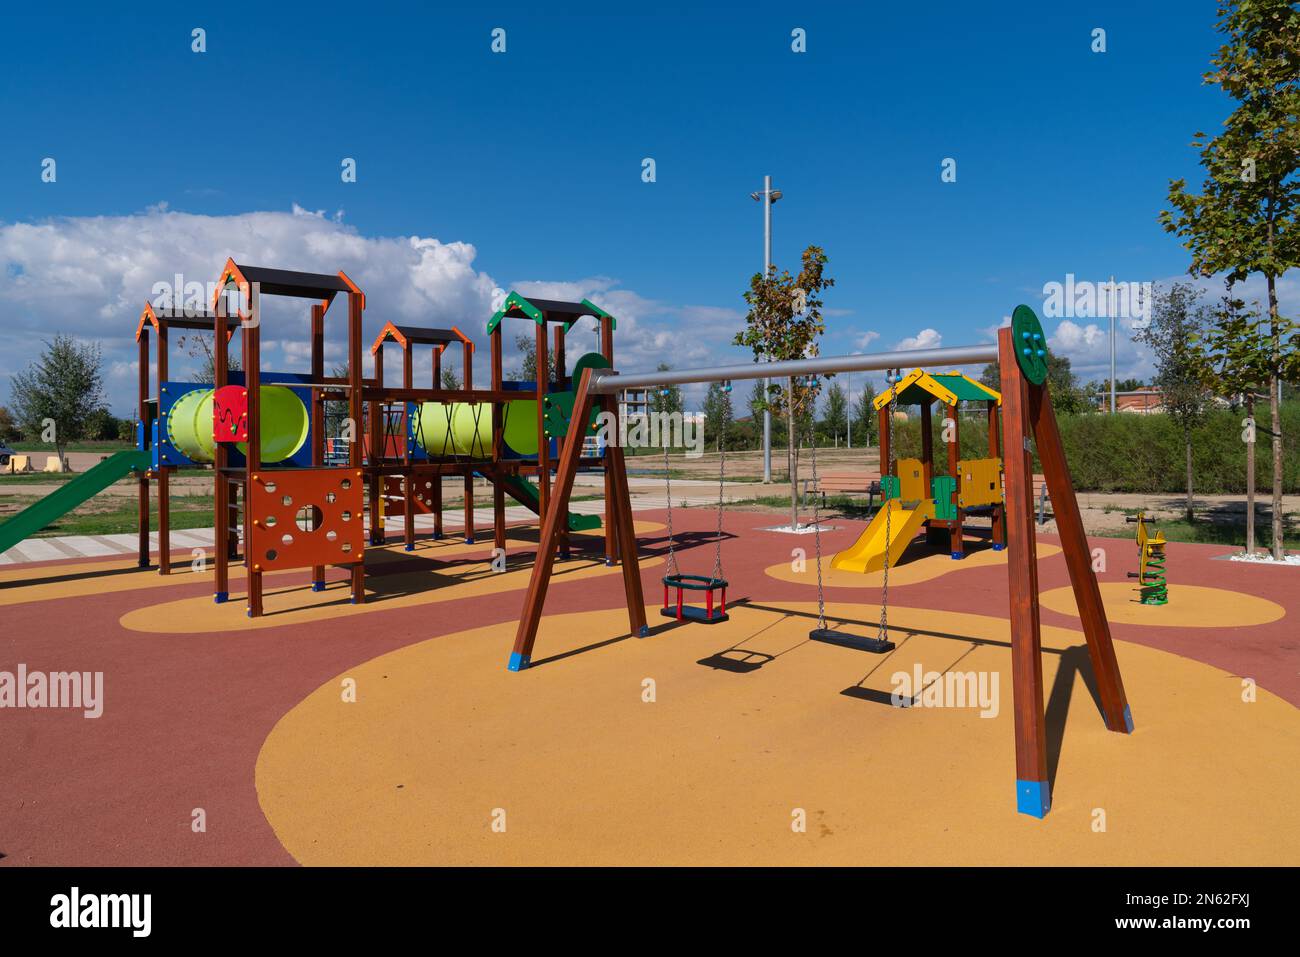 Play area outside for children with colourful swings and slides Stock Photo